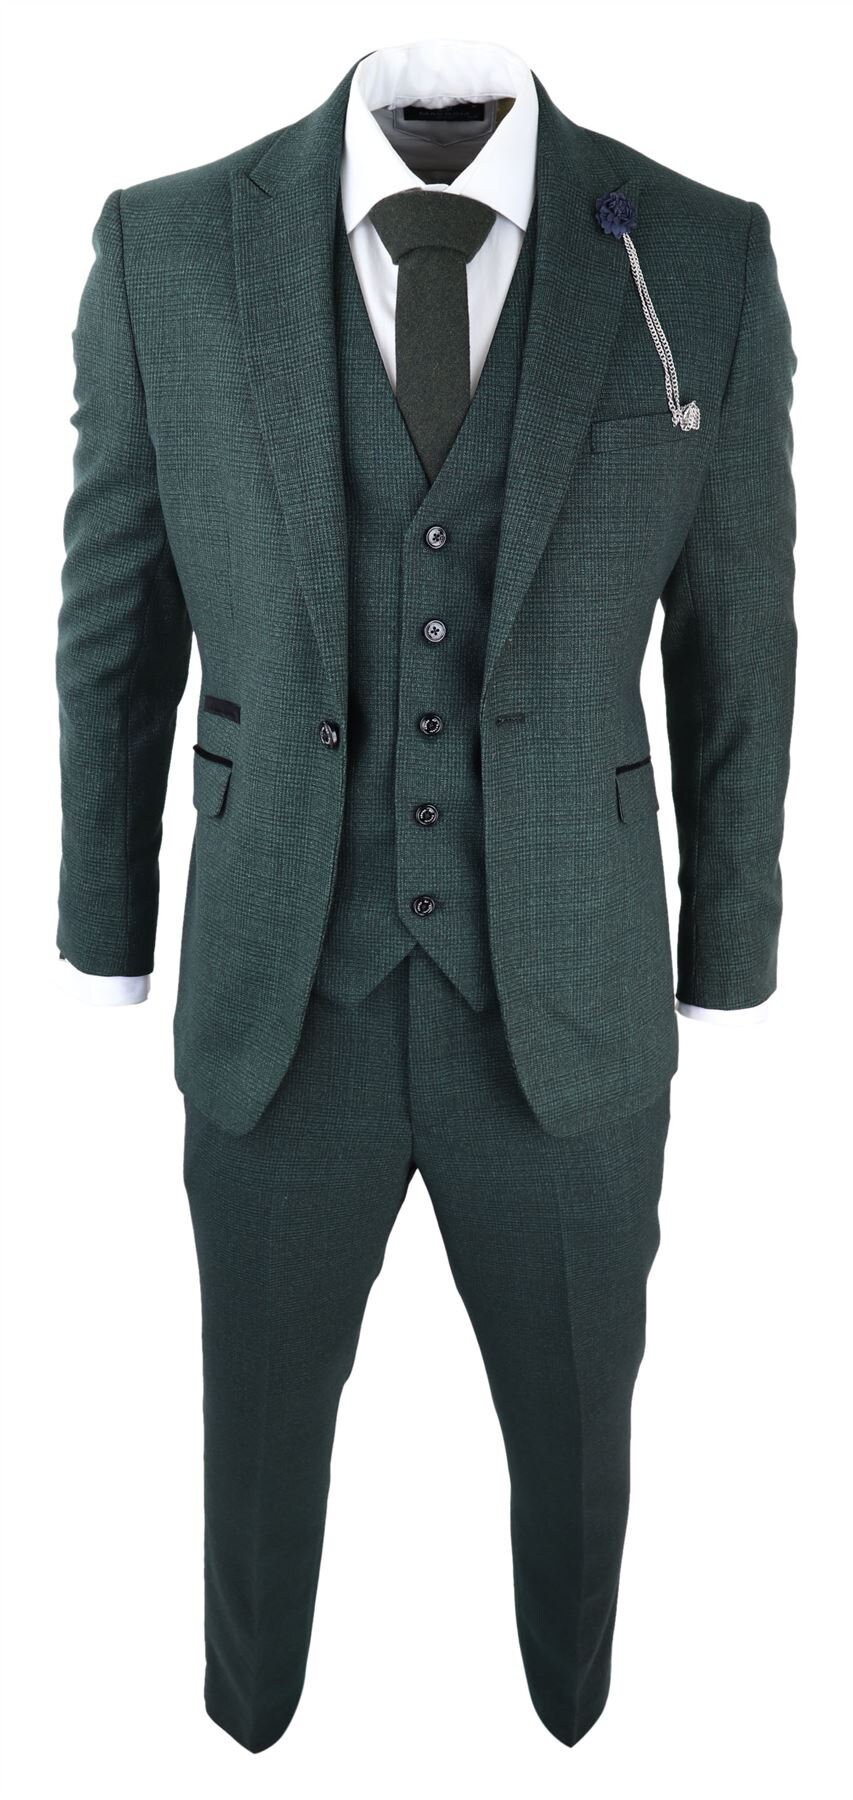 Mens 3 Piece Check Suit Tweed Olive Green Tailored Fit Wedding - Etsy UK